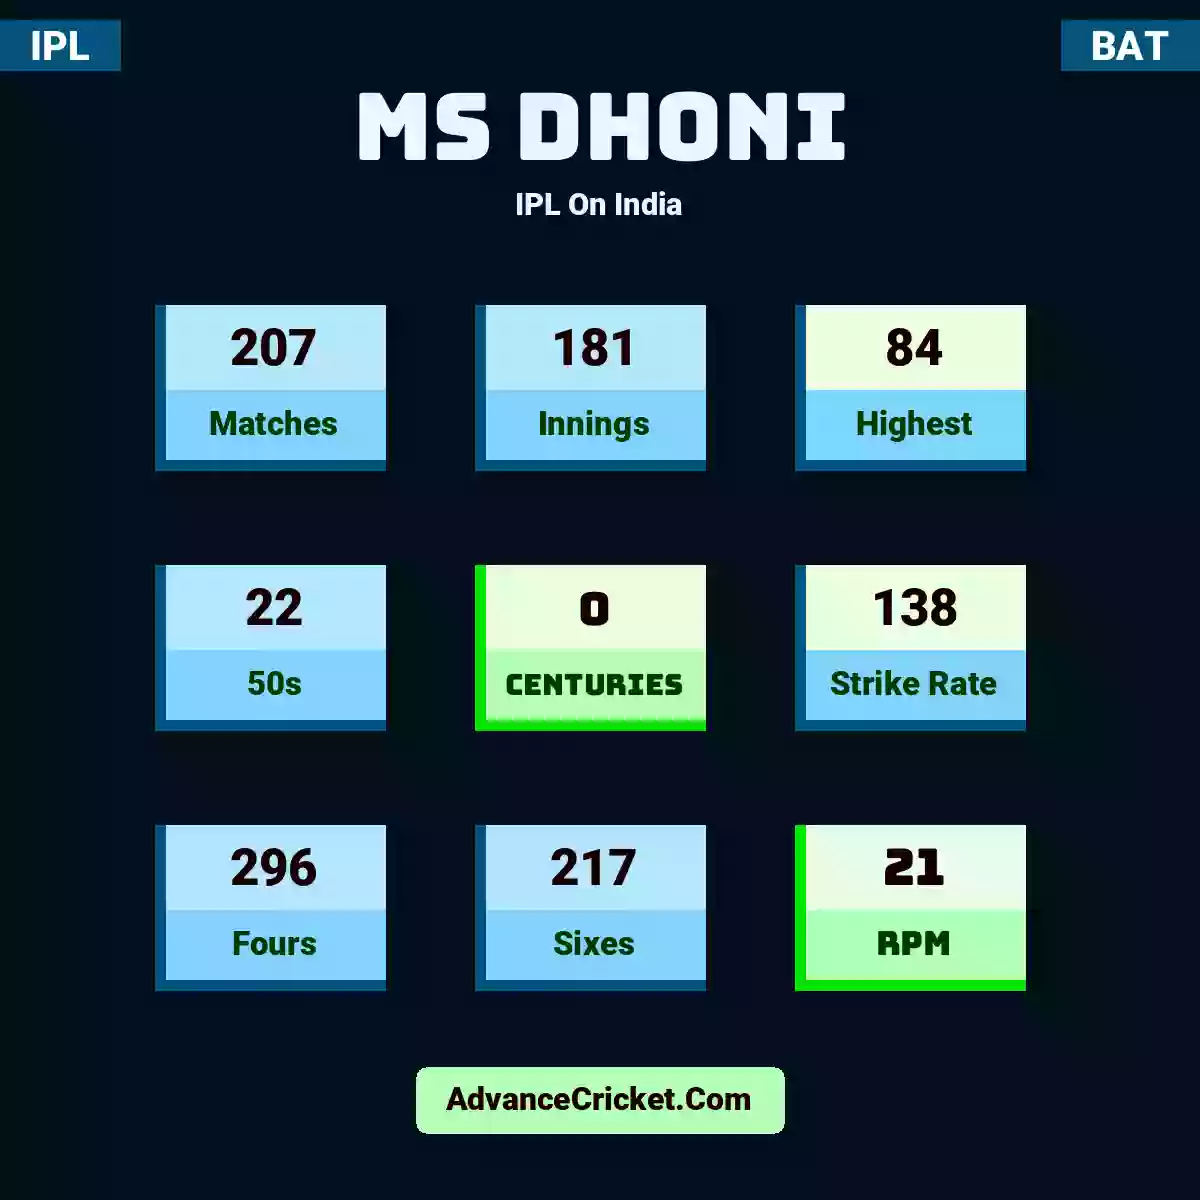 MS Dhoni IPL  On India, MS Dhoni played 207 matches, scored 84 runs as highest, 22 half-centuries, and 0 centuries, with a strike rate of 138. M.Dhoni hit 296 fours and 217 sixes, with an RPM of 21.